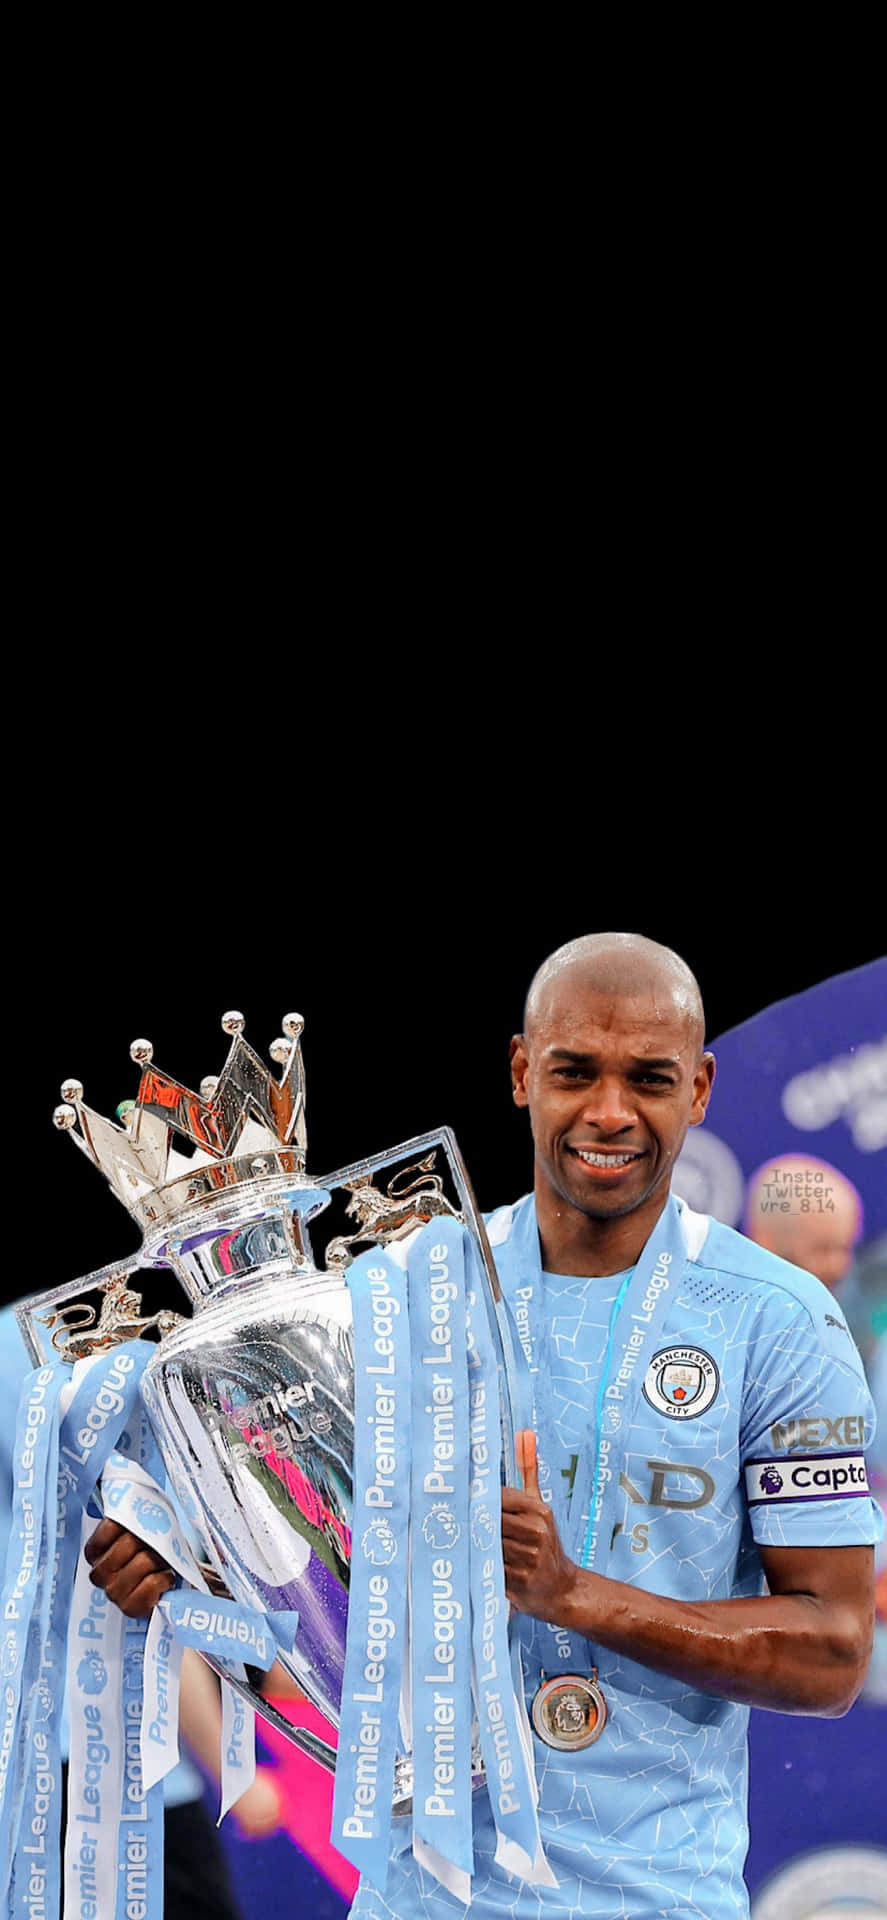 Manchester City Holding Trophy Iphone Wallpaper